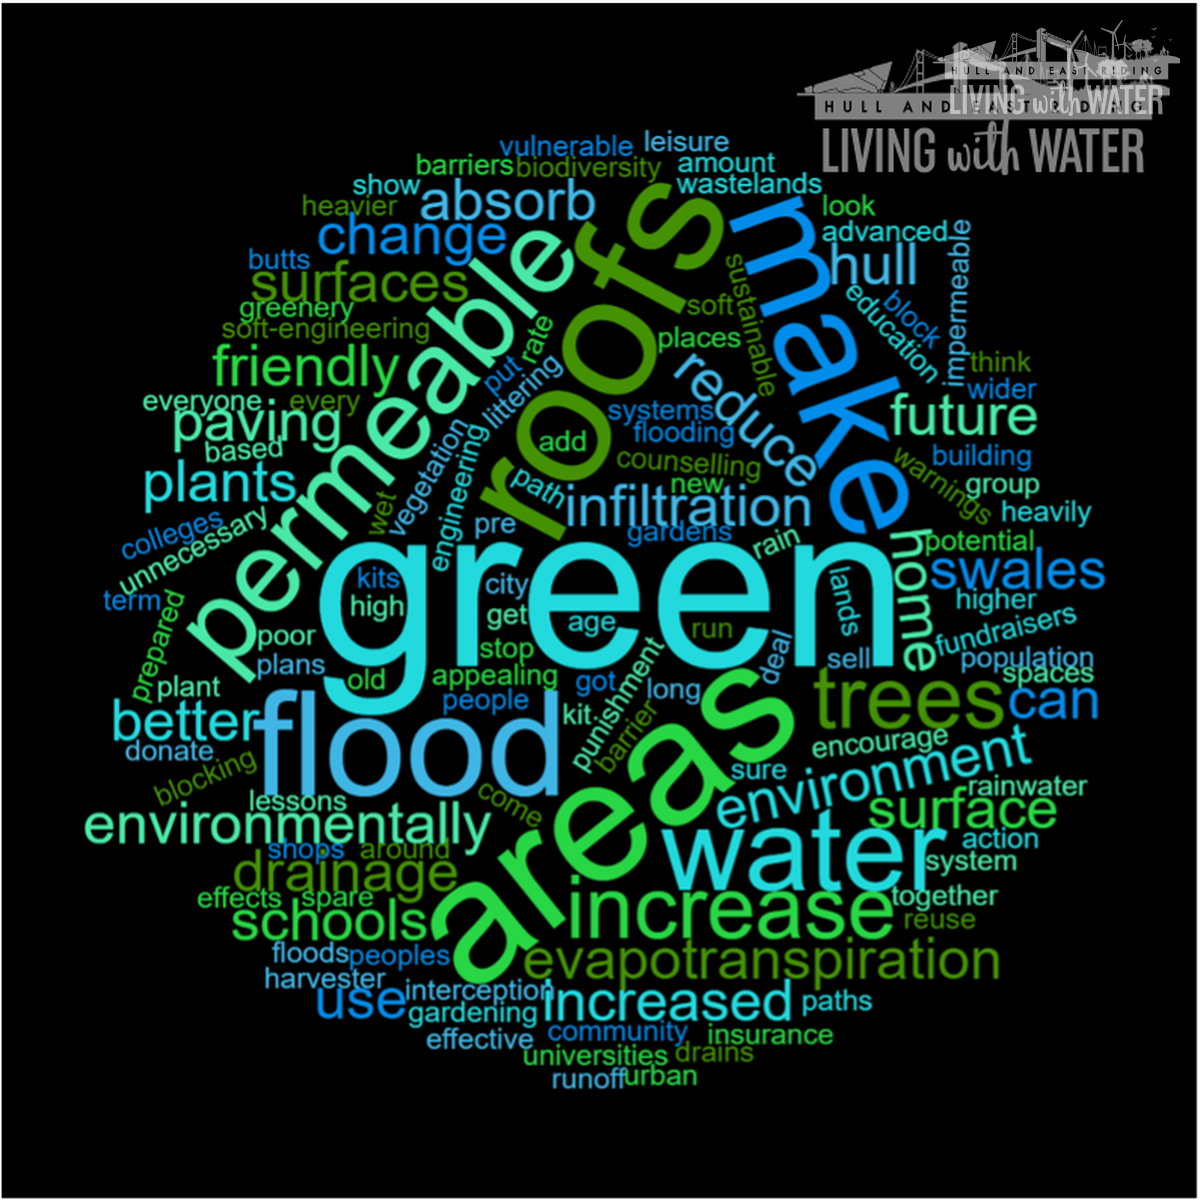 A cartoon image with words forming a circular globe, with some words including: green, areas, flood, permeable, roofs.